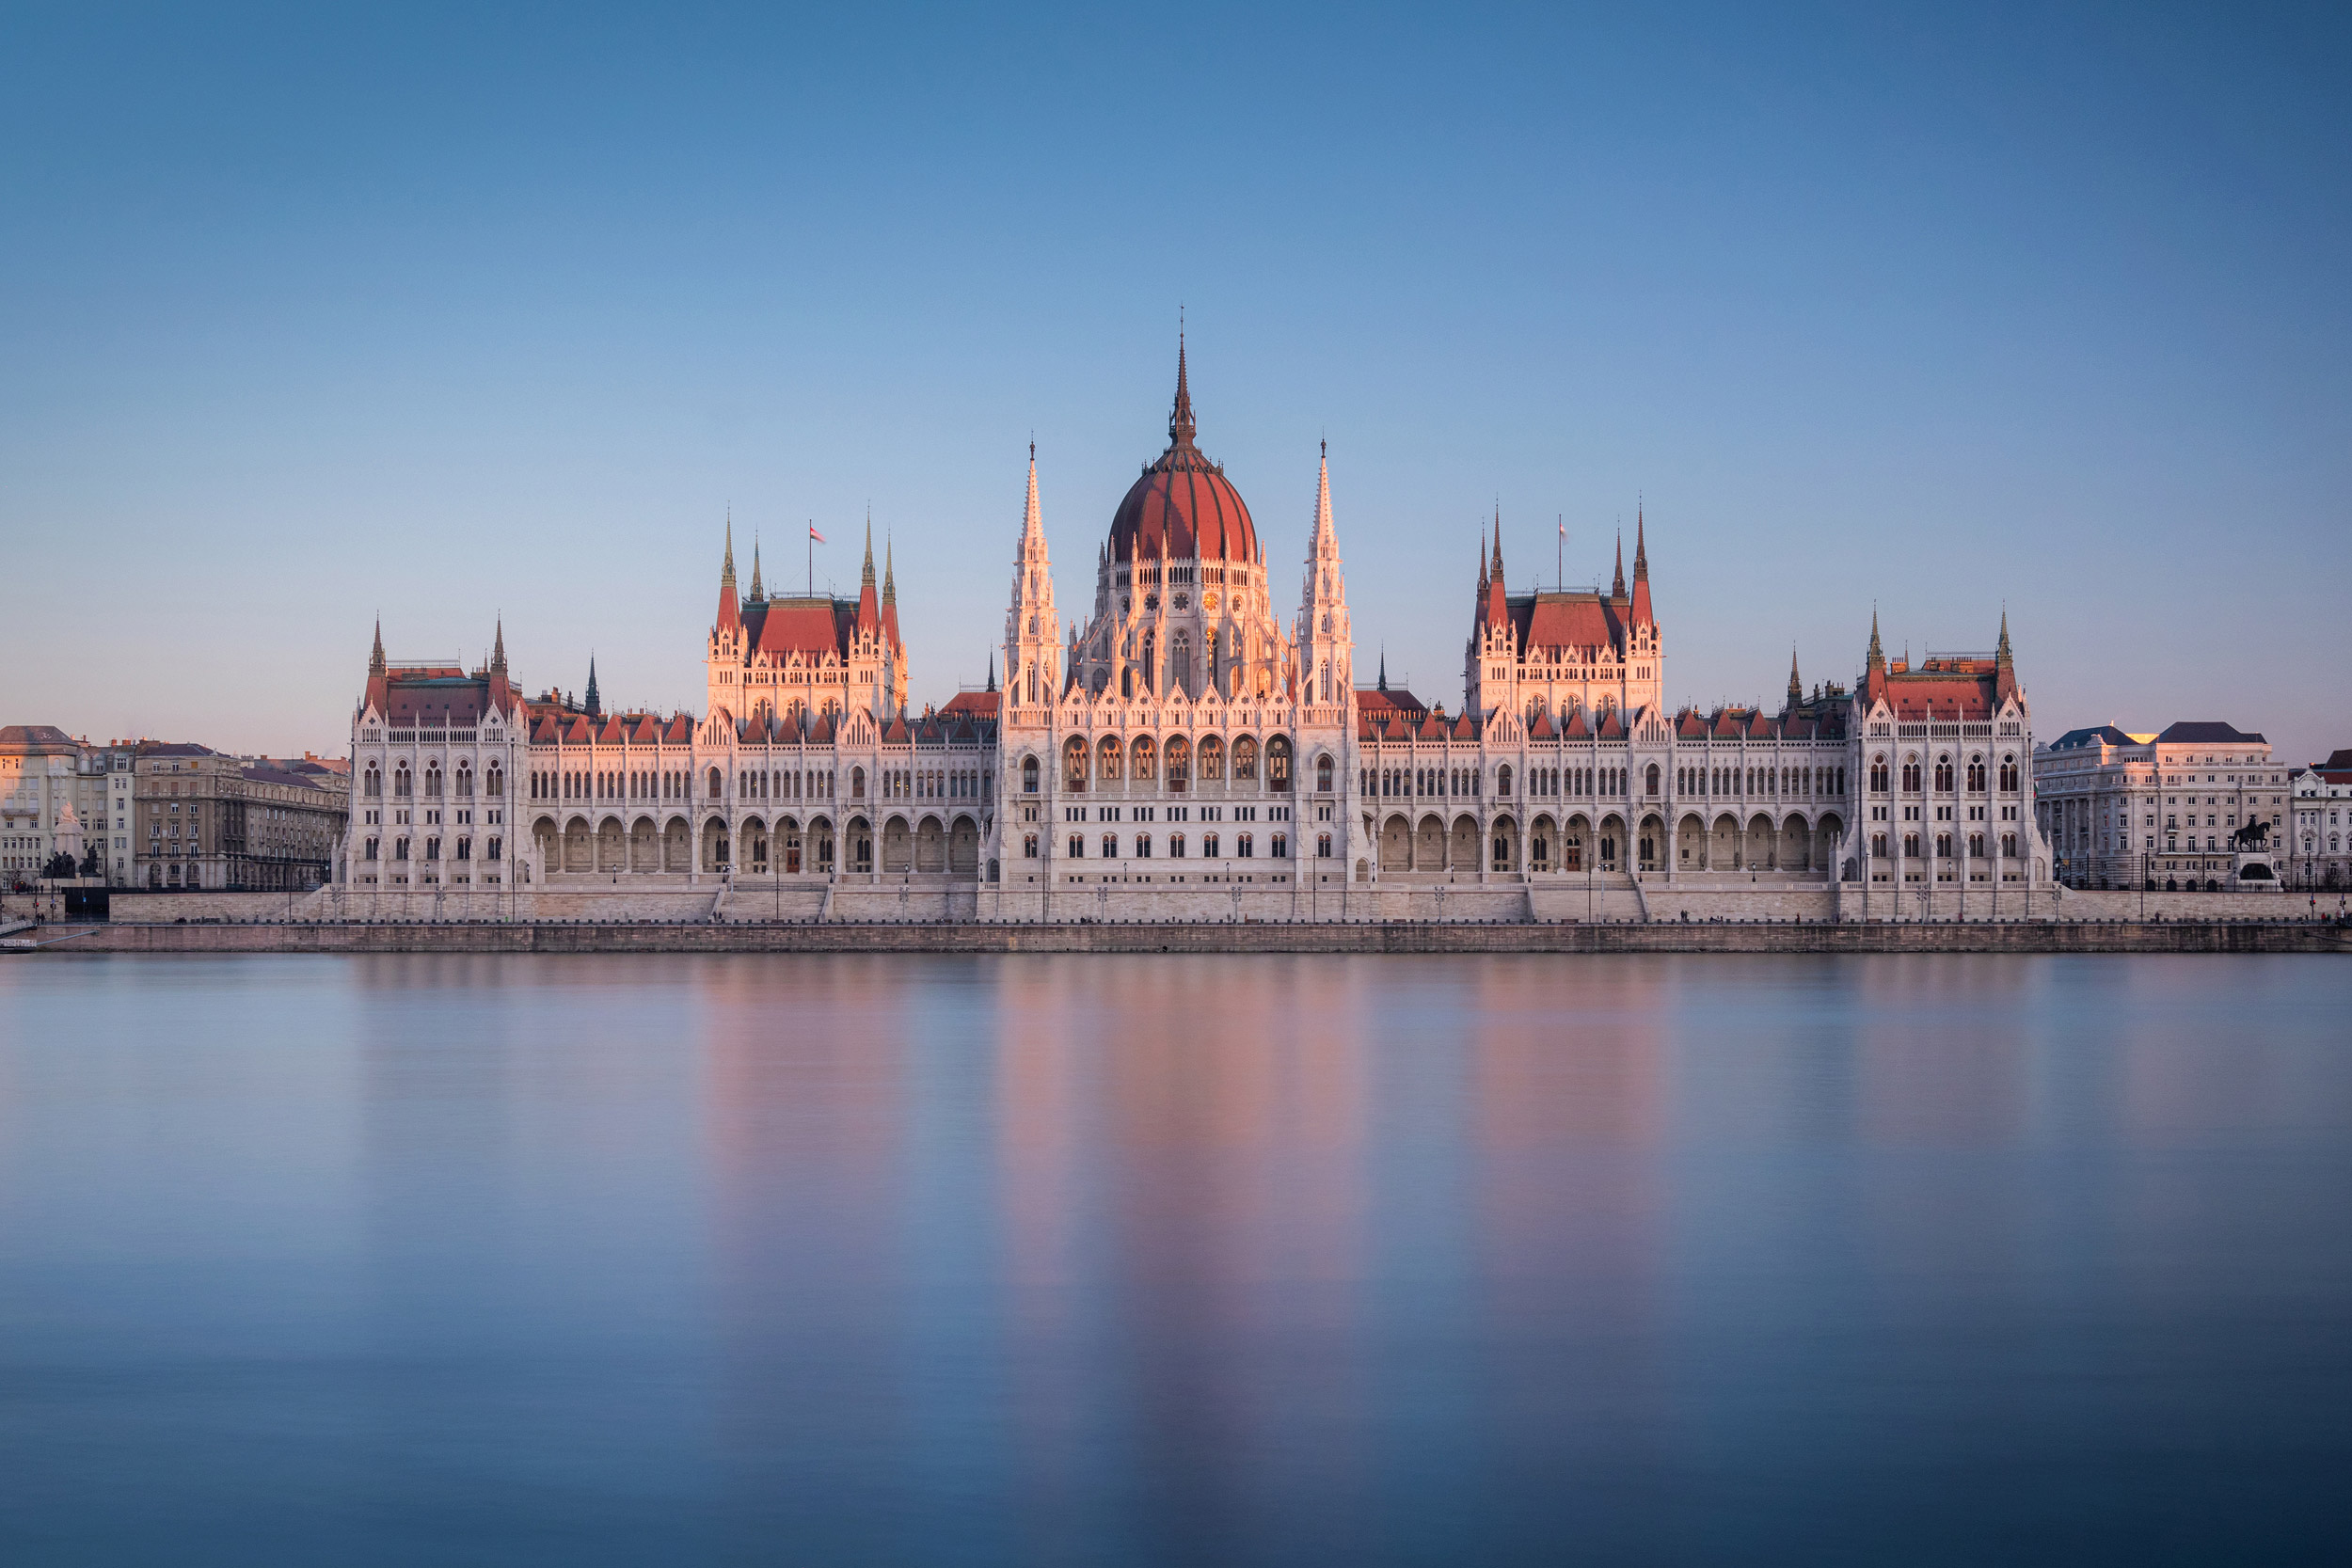 The Hungarian Parliament Building on the bank of the Danube at t